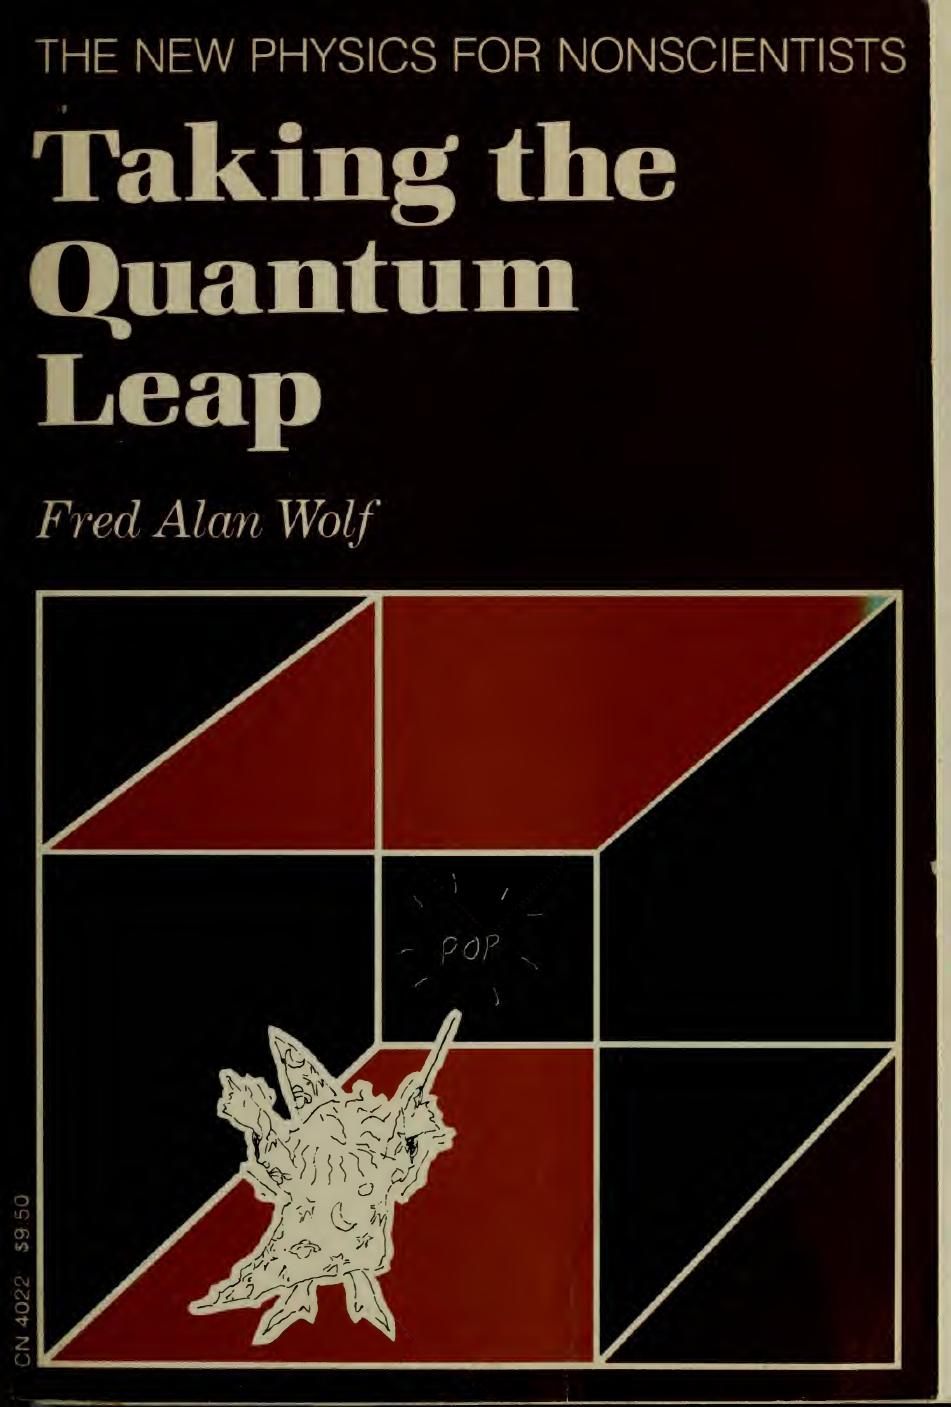 Taking the Quantum Leap: The New Physics for Nonscientists